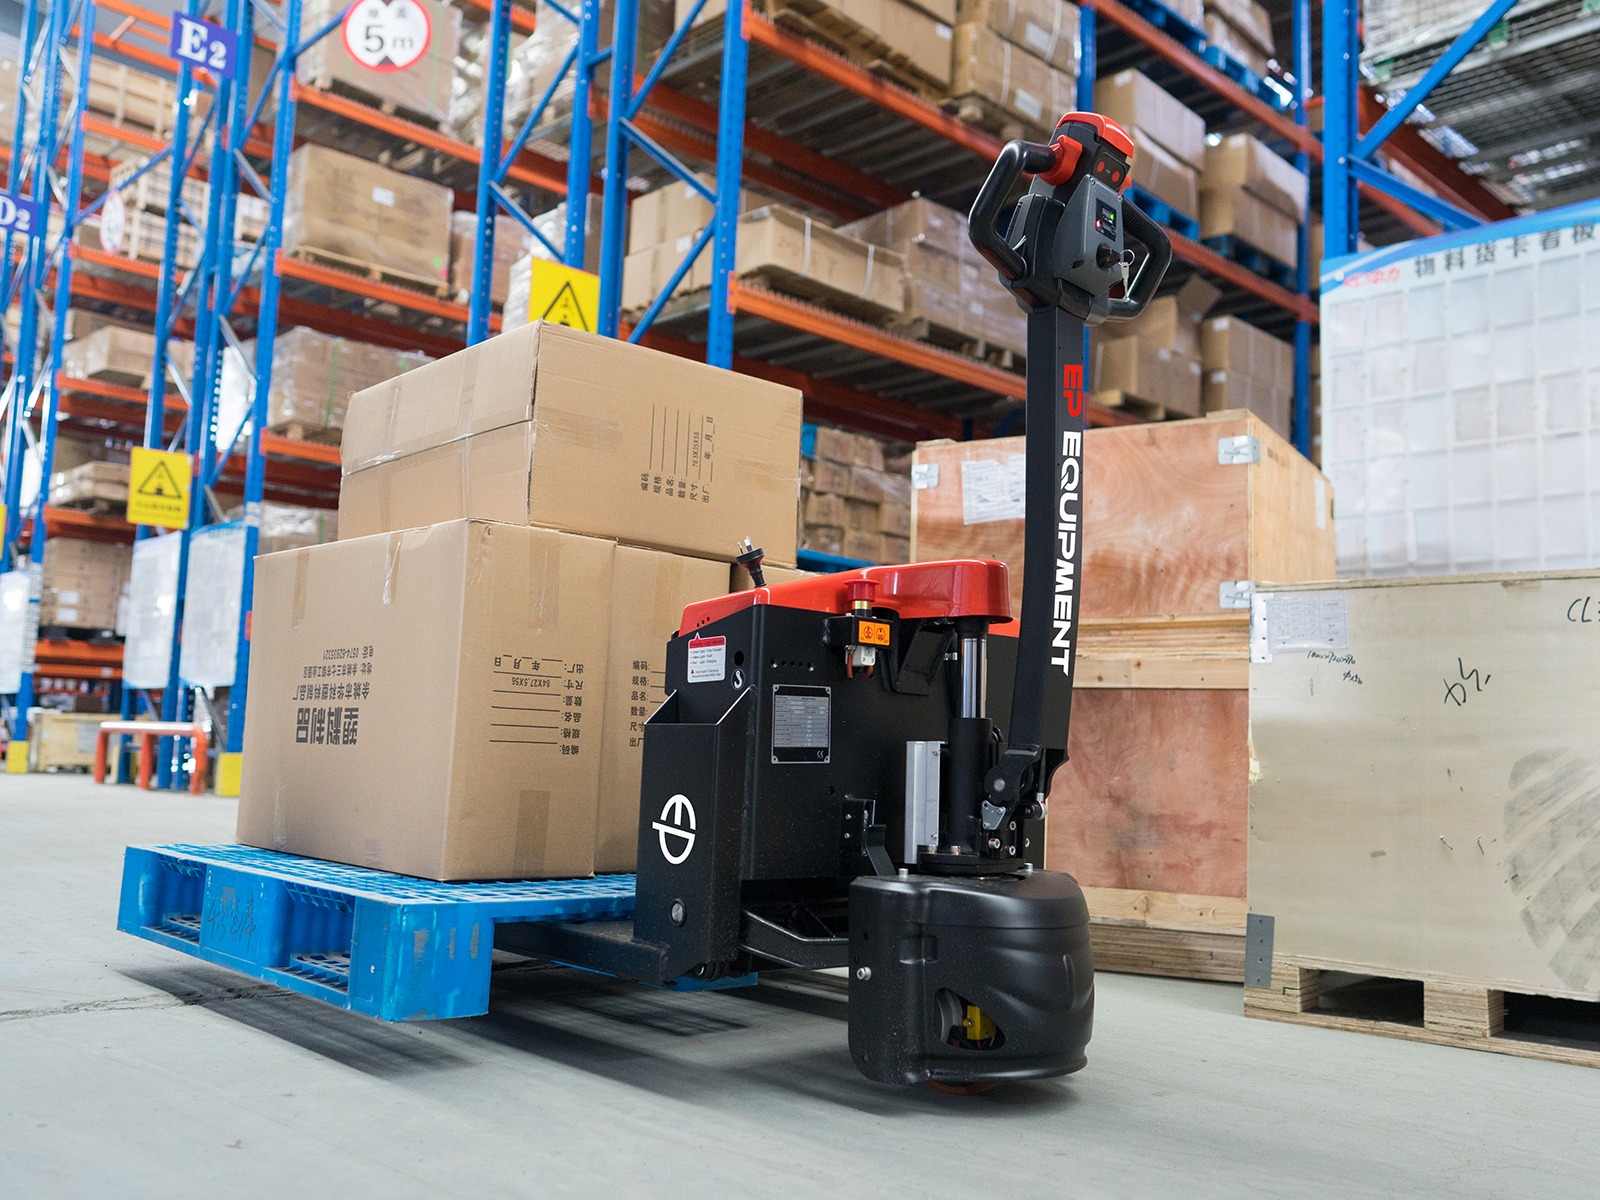 EPT20-15ET2 electric pallet truck being used in a warehouse.